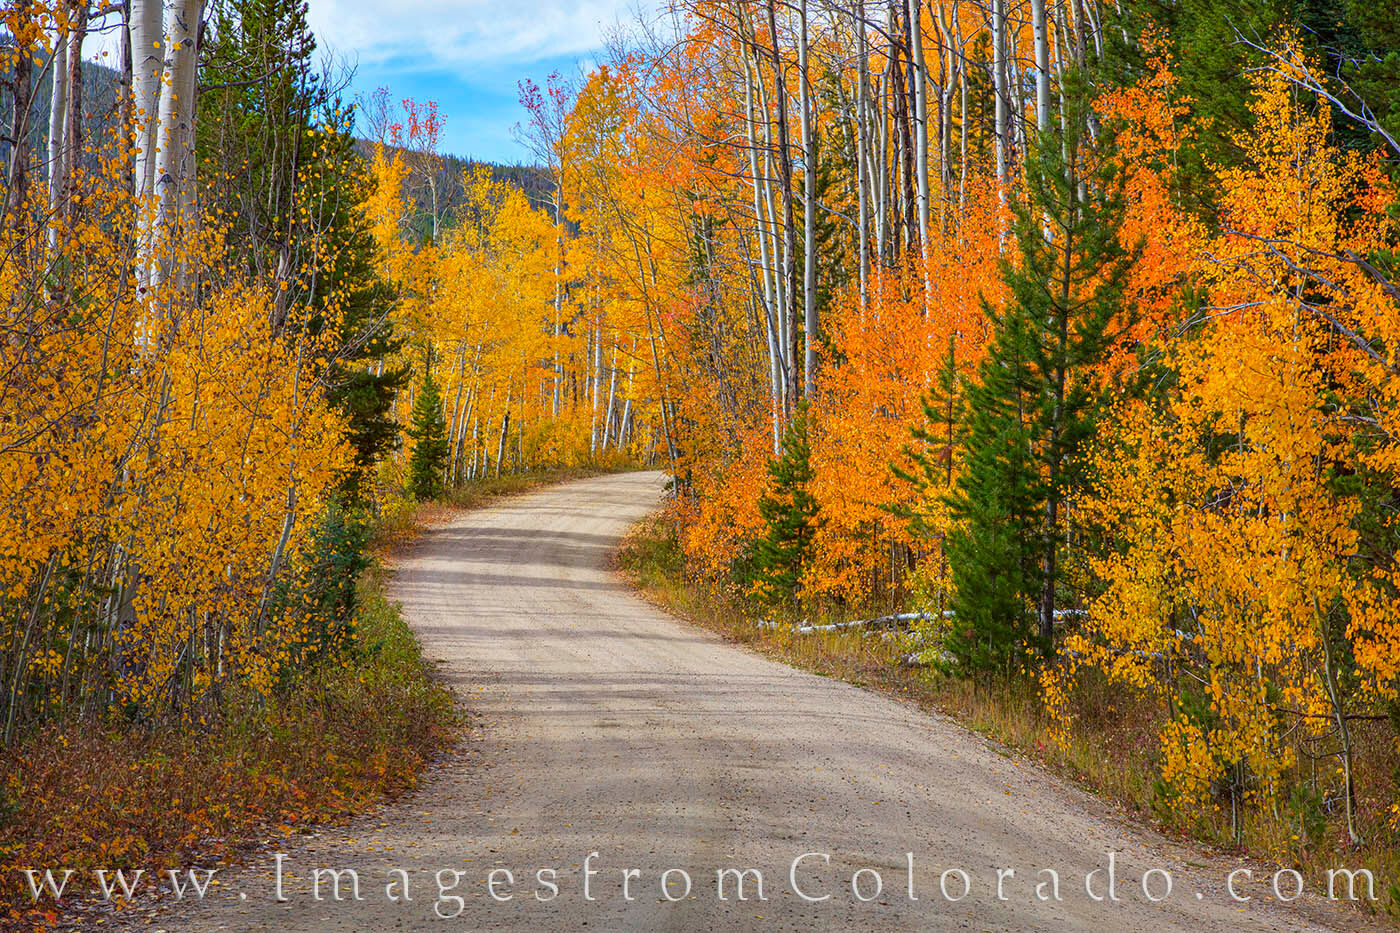 Behind the resort town of Winter Park, CR 72 shows off its fall colors on a cool, late September day. I loved how the winding...